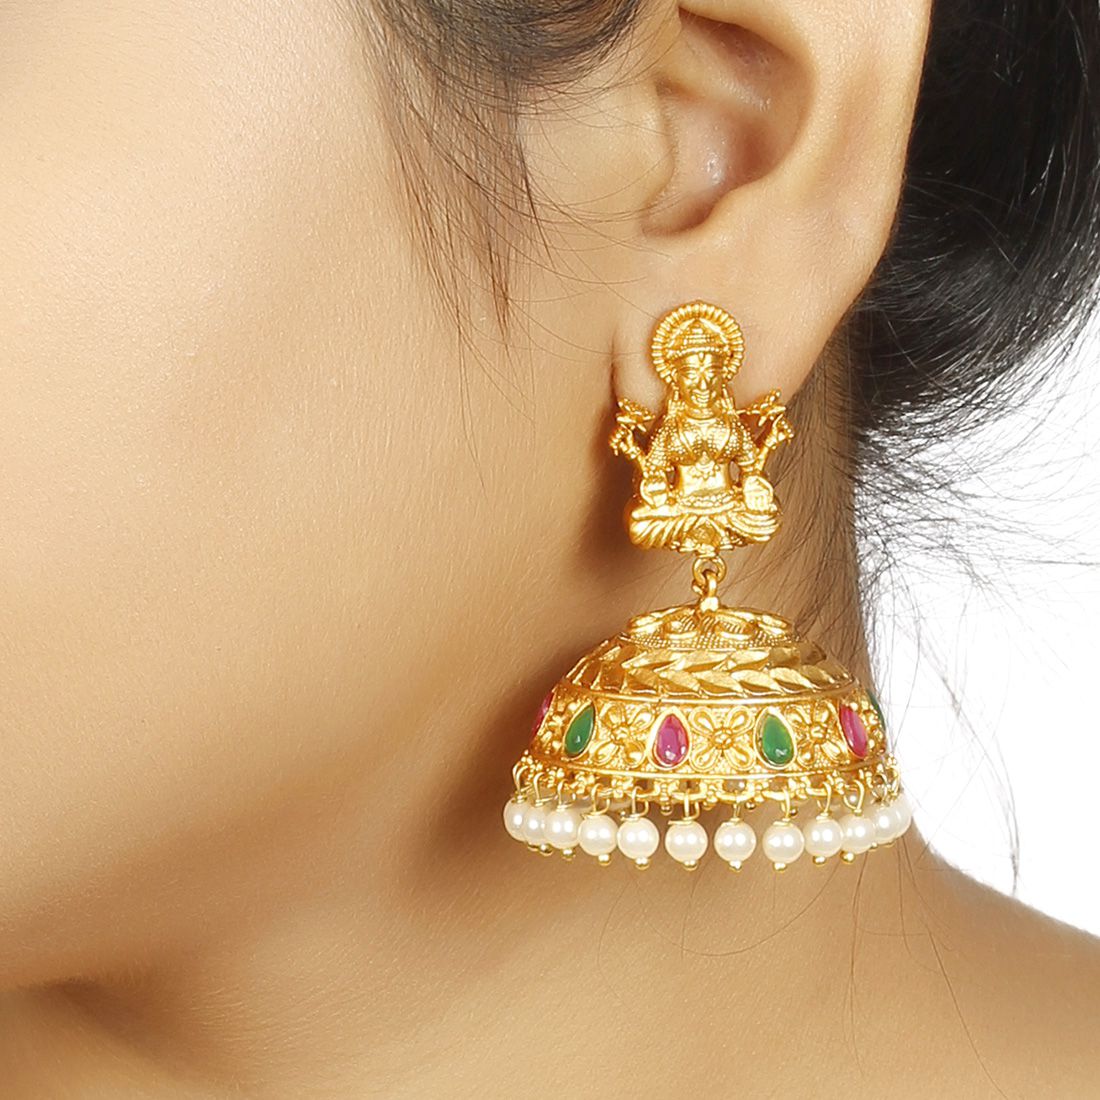 MUCH MORE Indian Traditional Polki Earring With laxmi Mata Temple ...